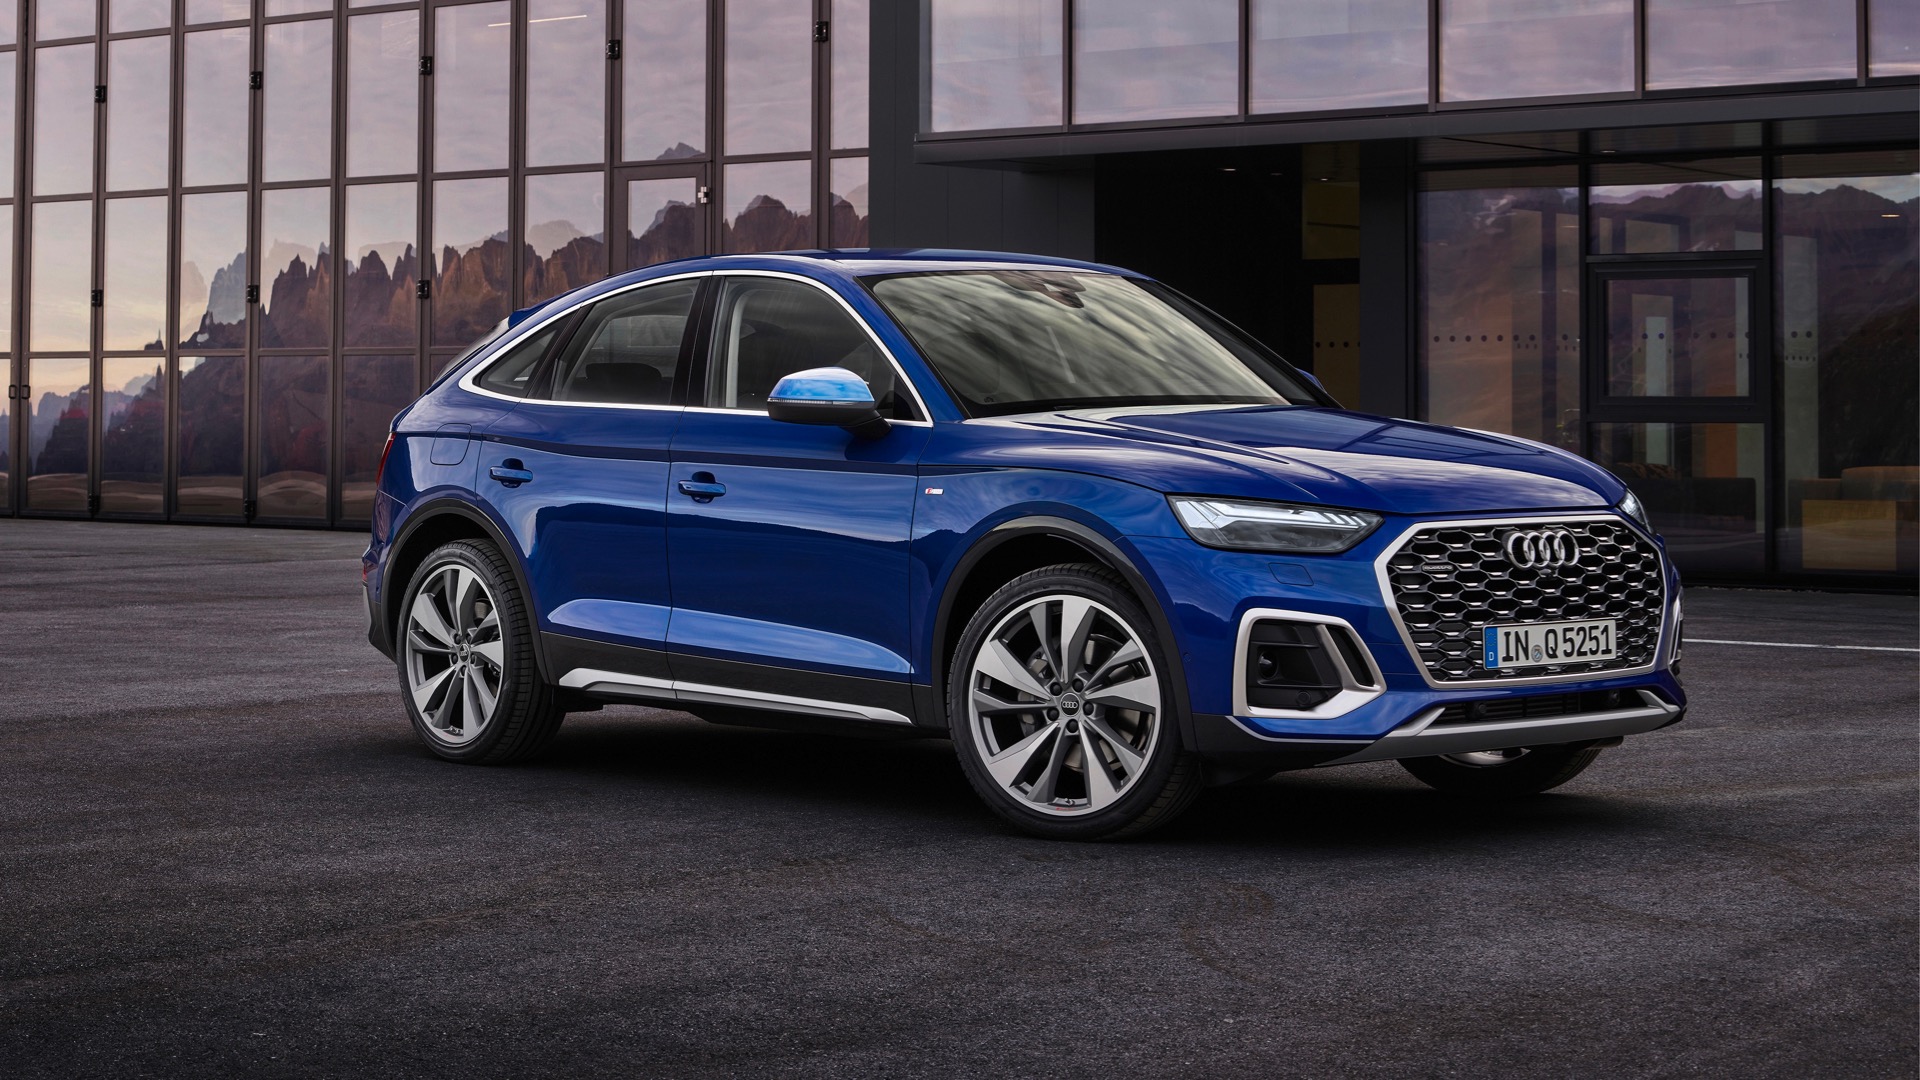 2021 Audi Q5 Reviews, Insights, and Specs